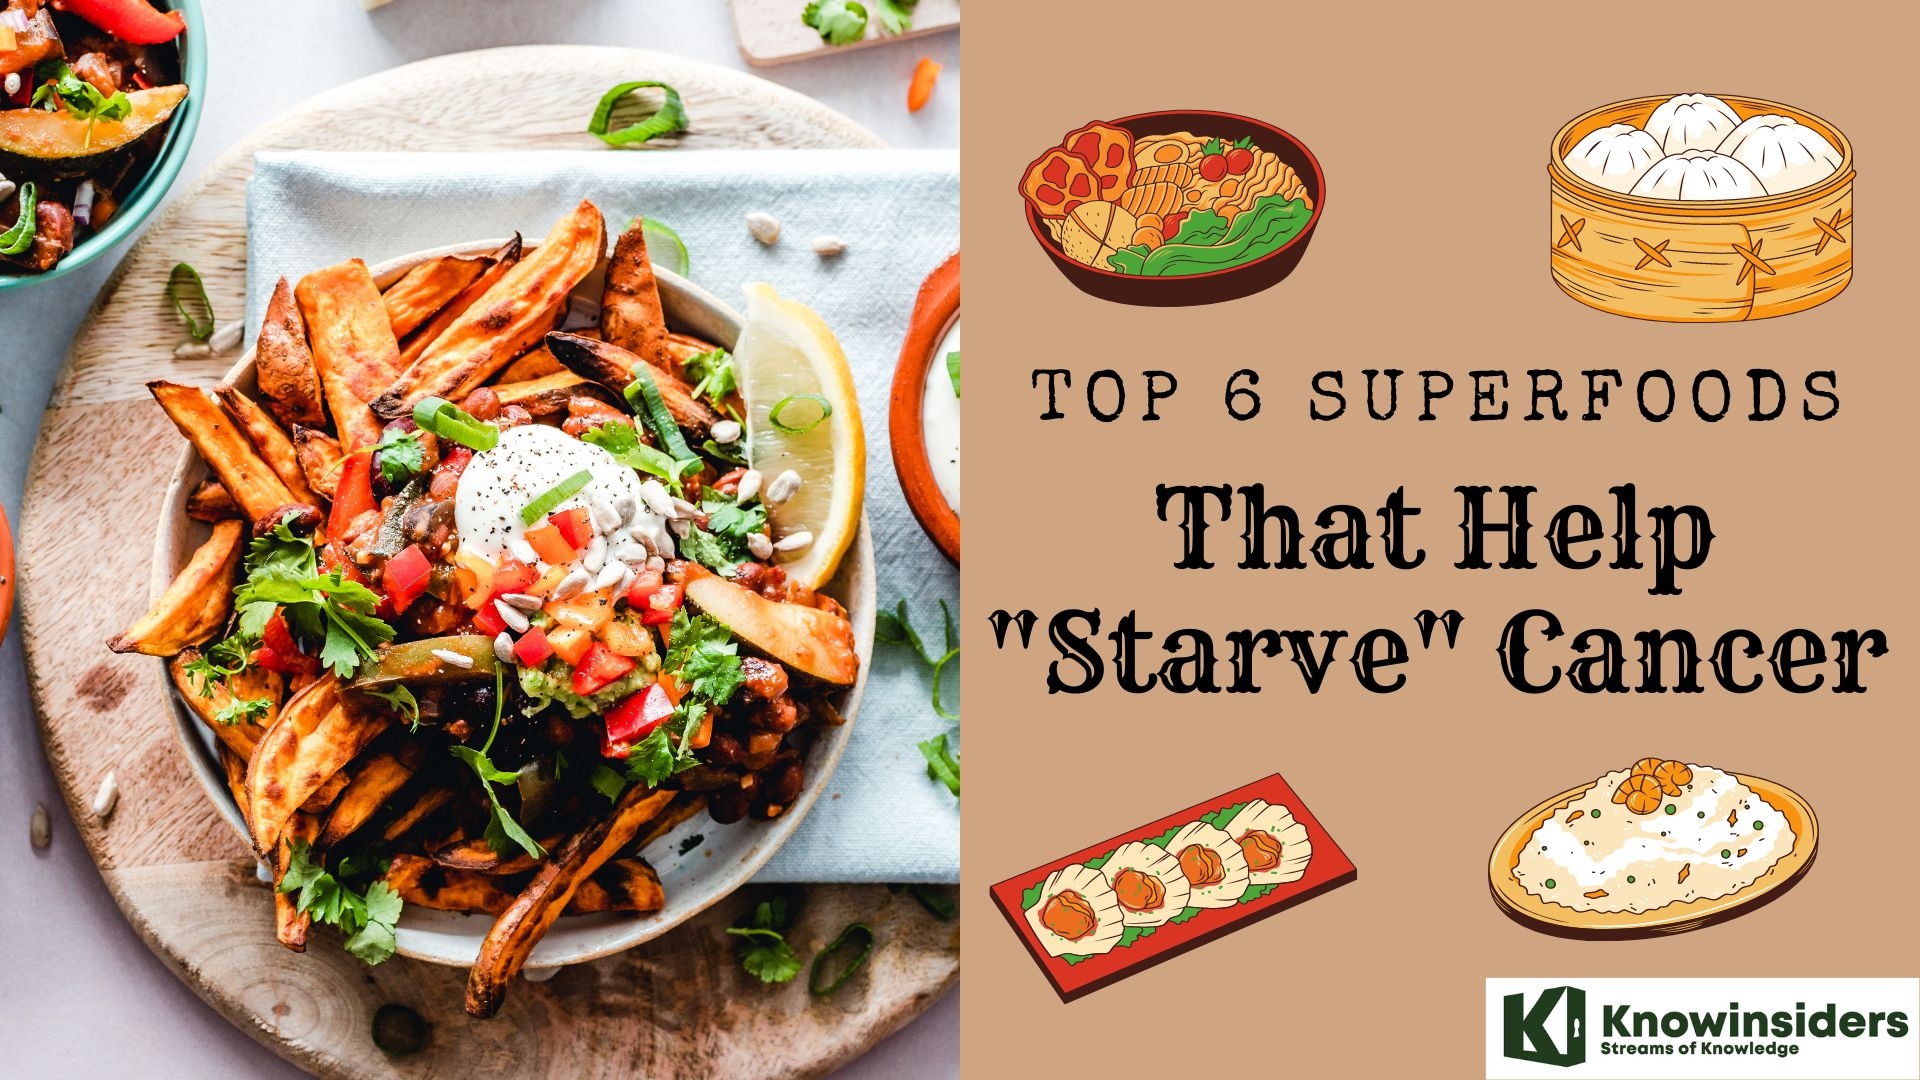 Top 6 Superfoods That Can “Starve” Cancer  Knowinsiders.com